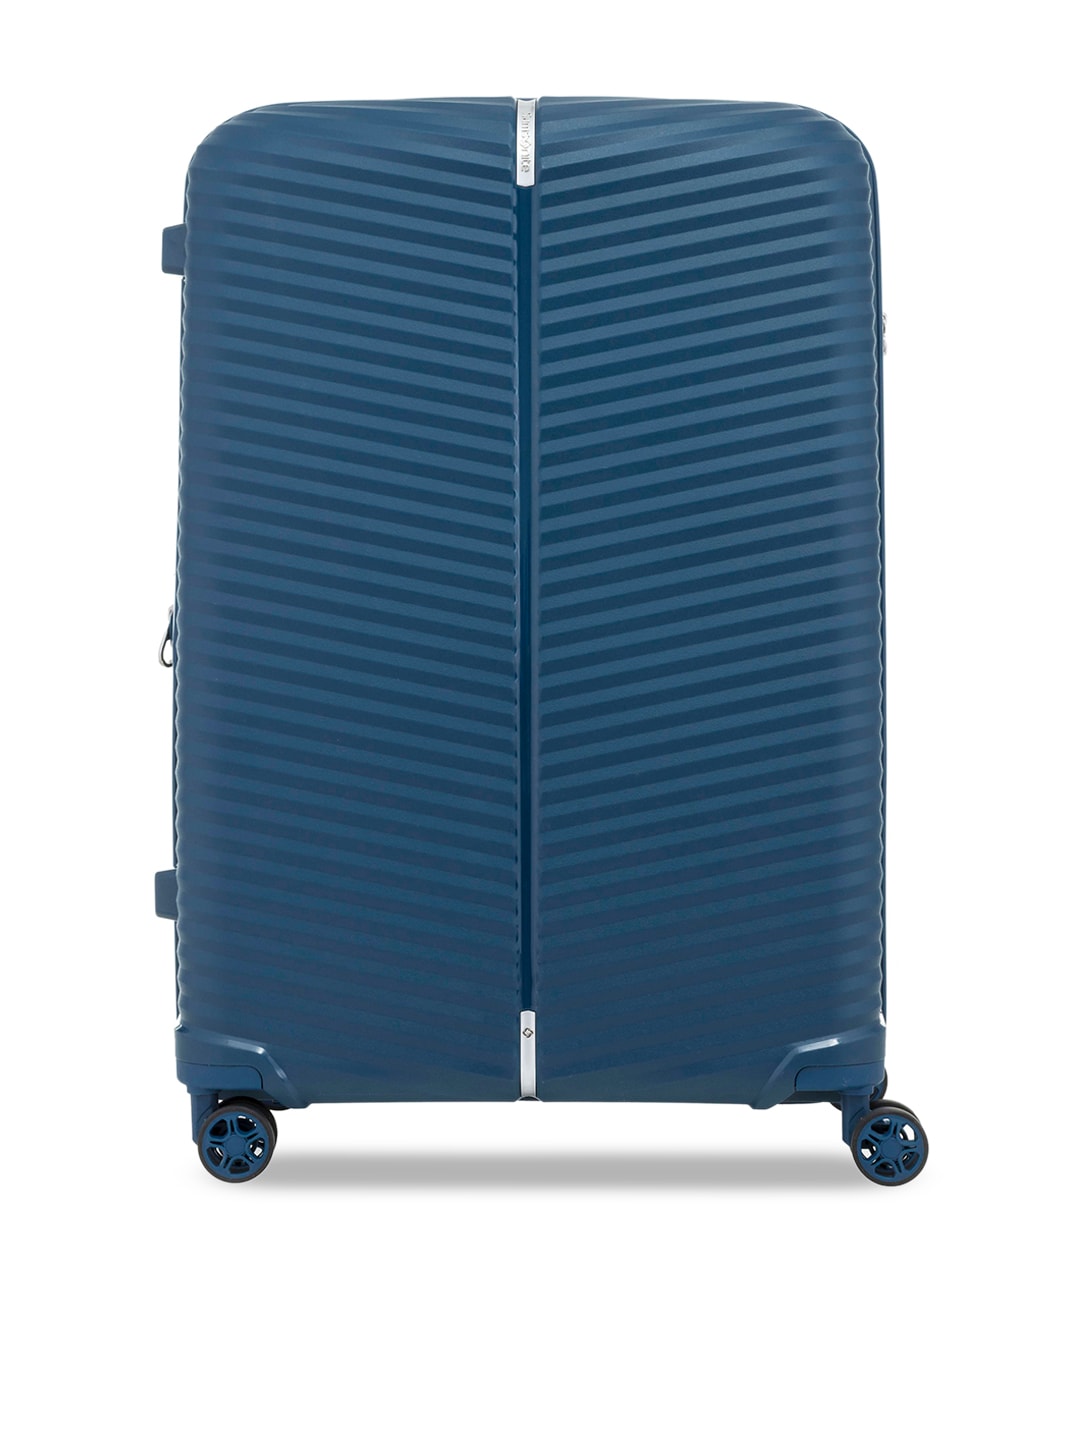 Samsonite Blue Solid Hard Large Trolley Suitcase Price in India